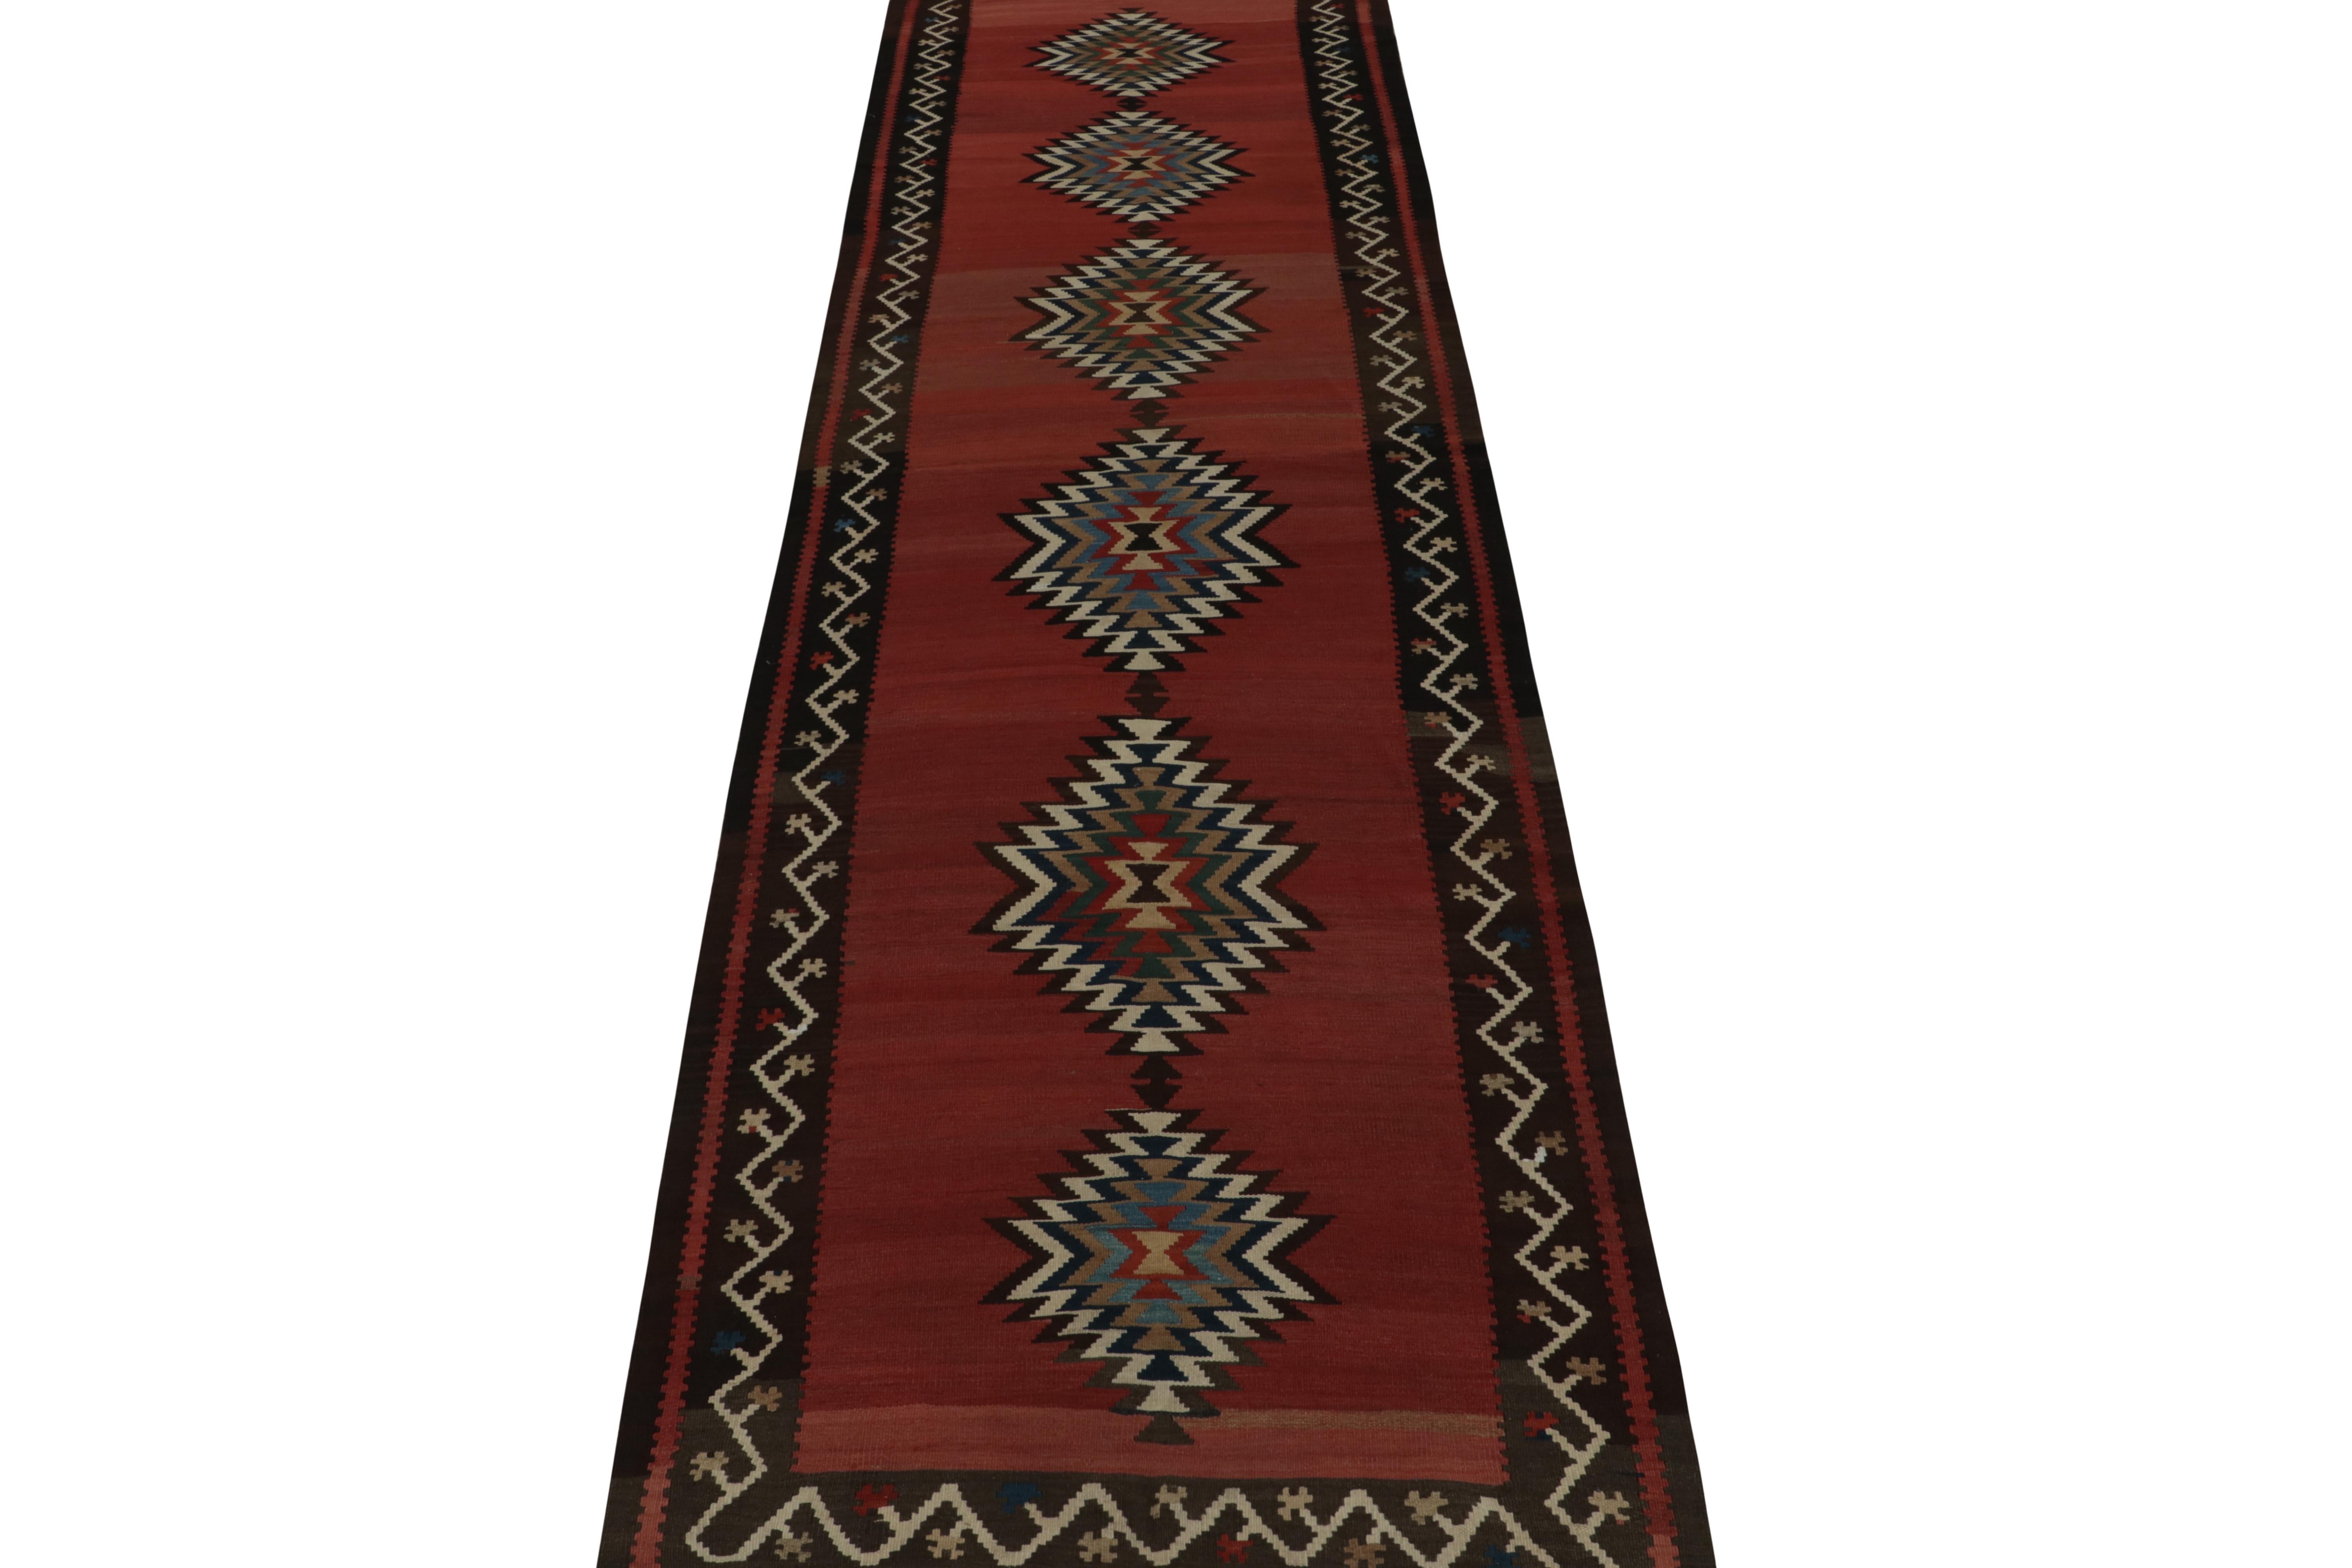 This vintage 4x14 Persian kilim is a tribal gallery runner—handwoven in wool, it’s believed to originate circa 1950-1960. 

Further on the Design:

The design prefers multicolor medallions on a red open field, wrapped in rich brown and off-white